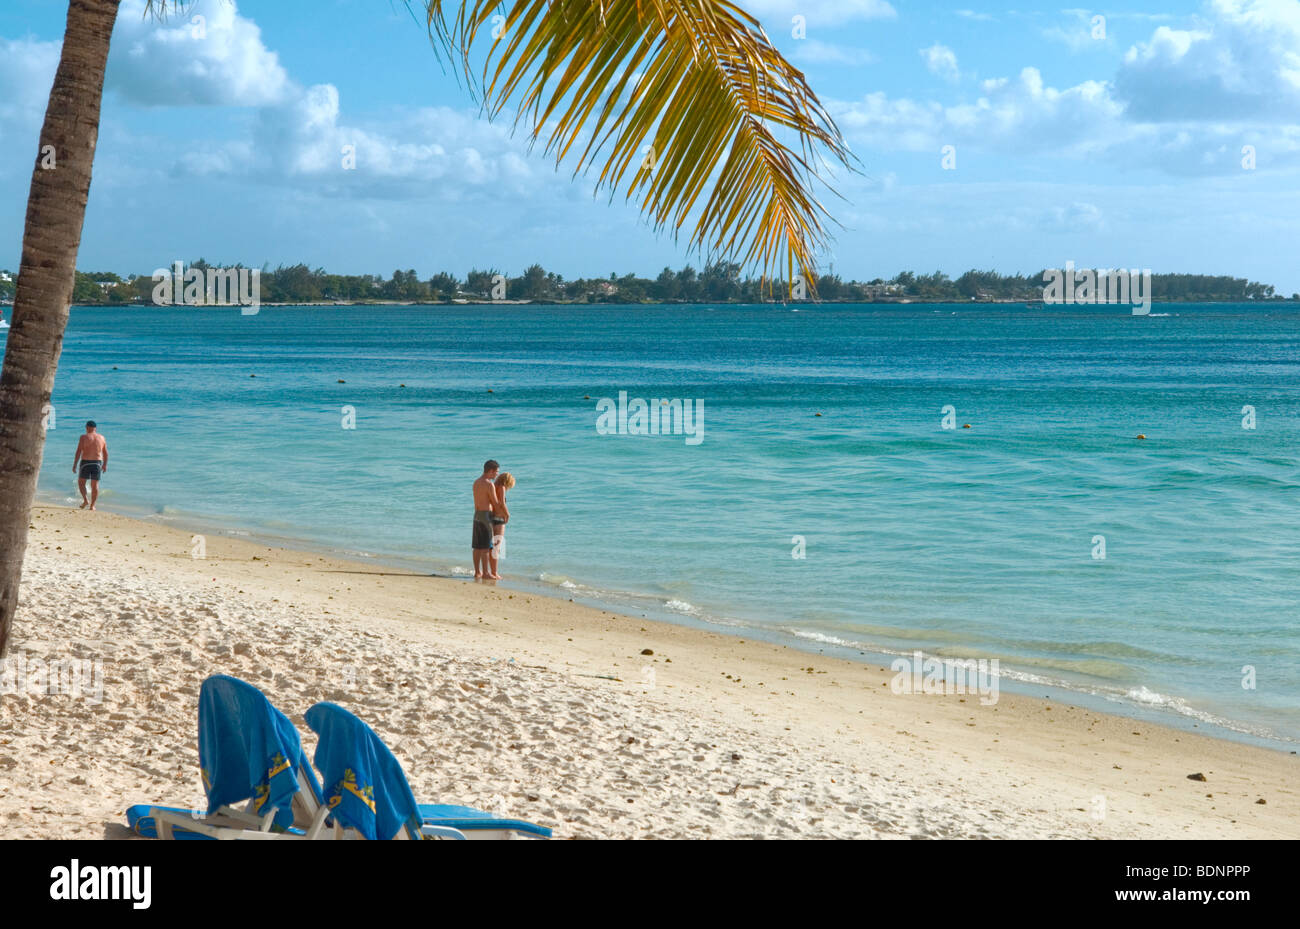 Beach in front of the HotelTrou aux Biches, Mauritius Stock Photo